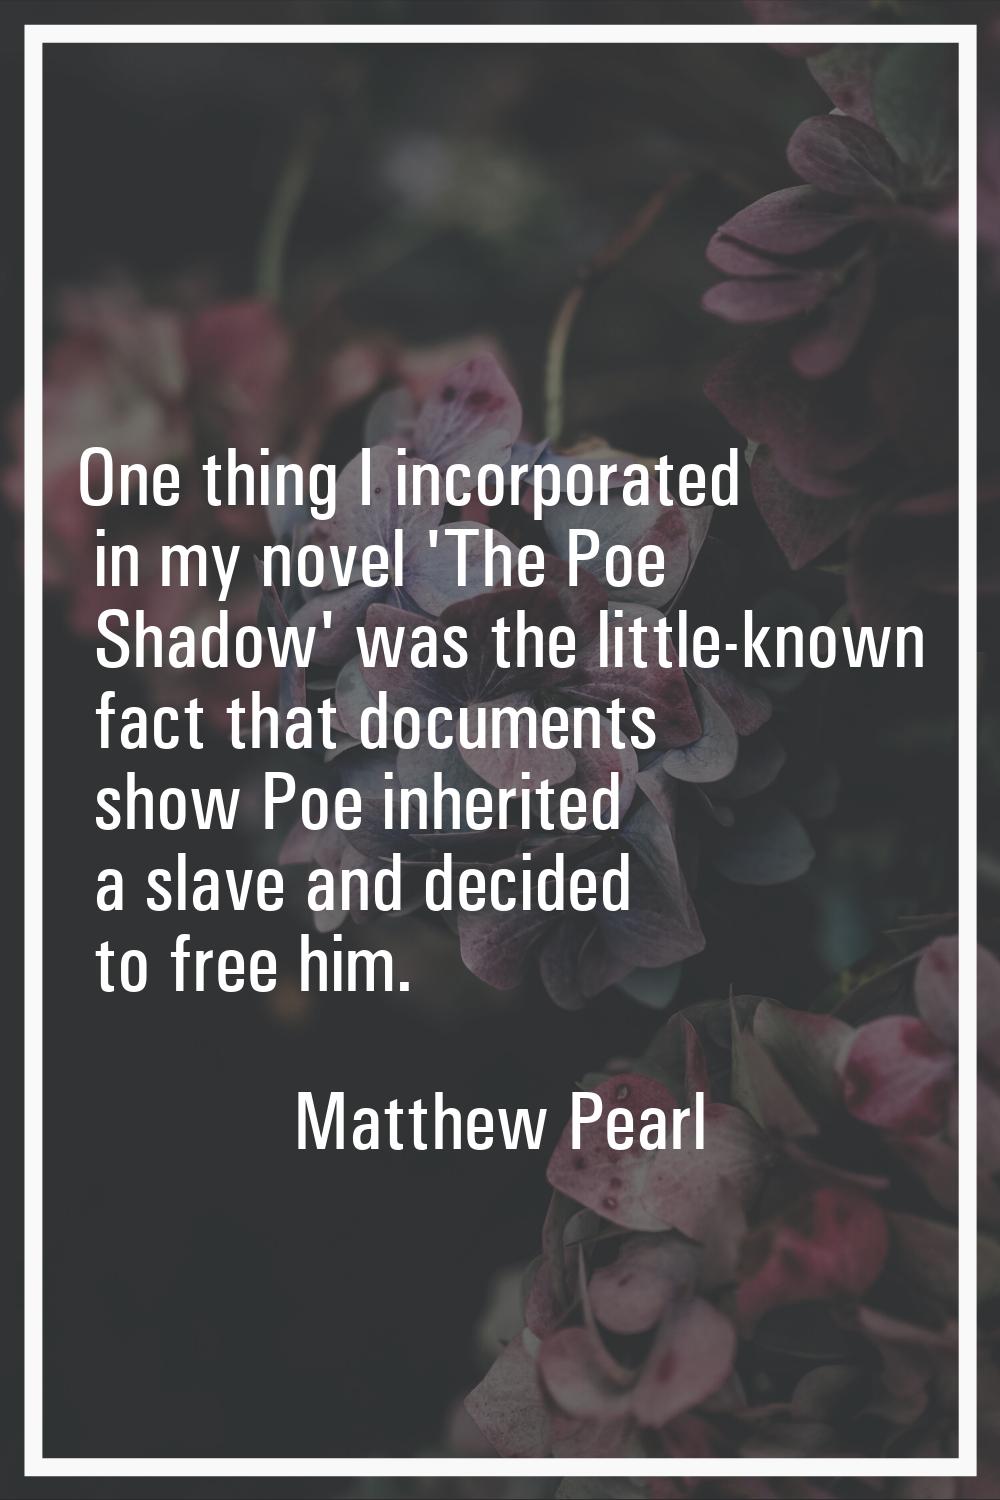 One thing I incorporated in my novel 'The Poe Shadow' was the little-known fact that documents show